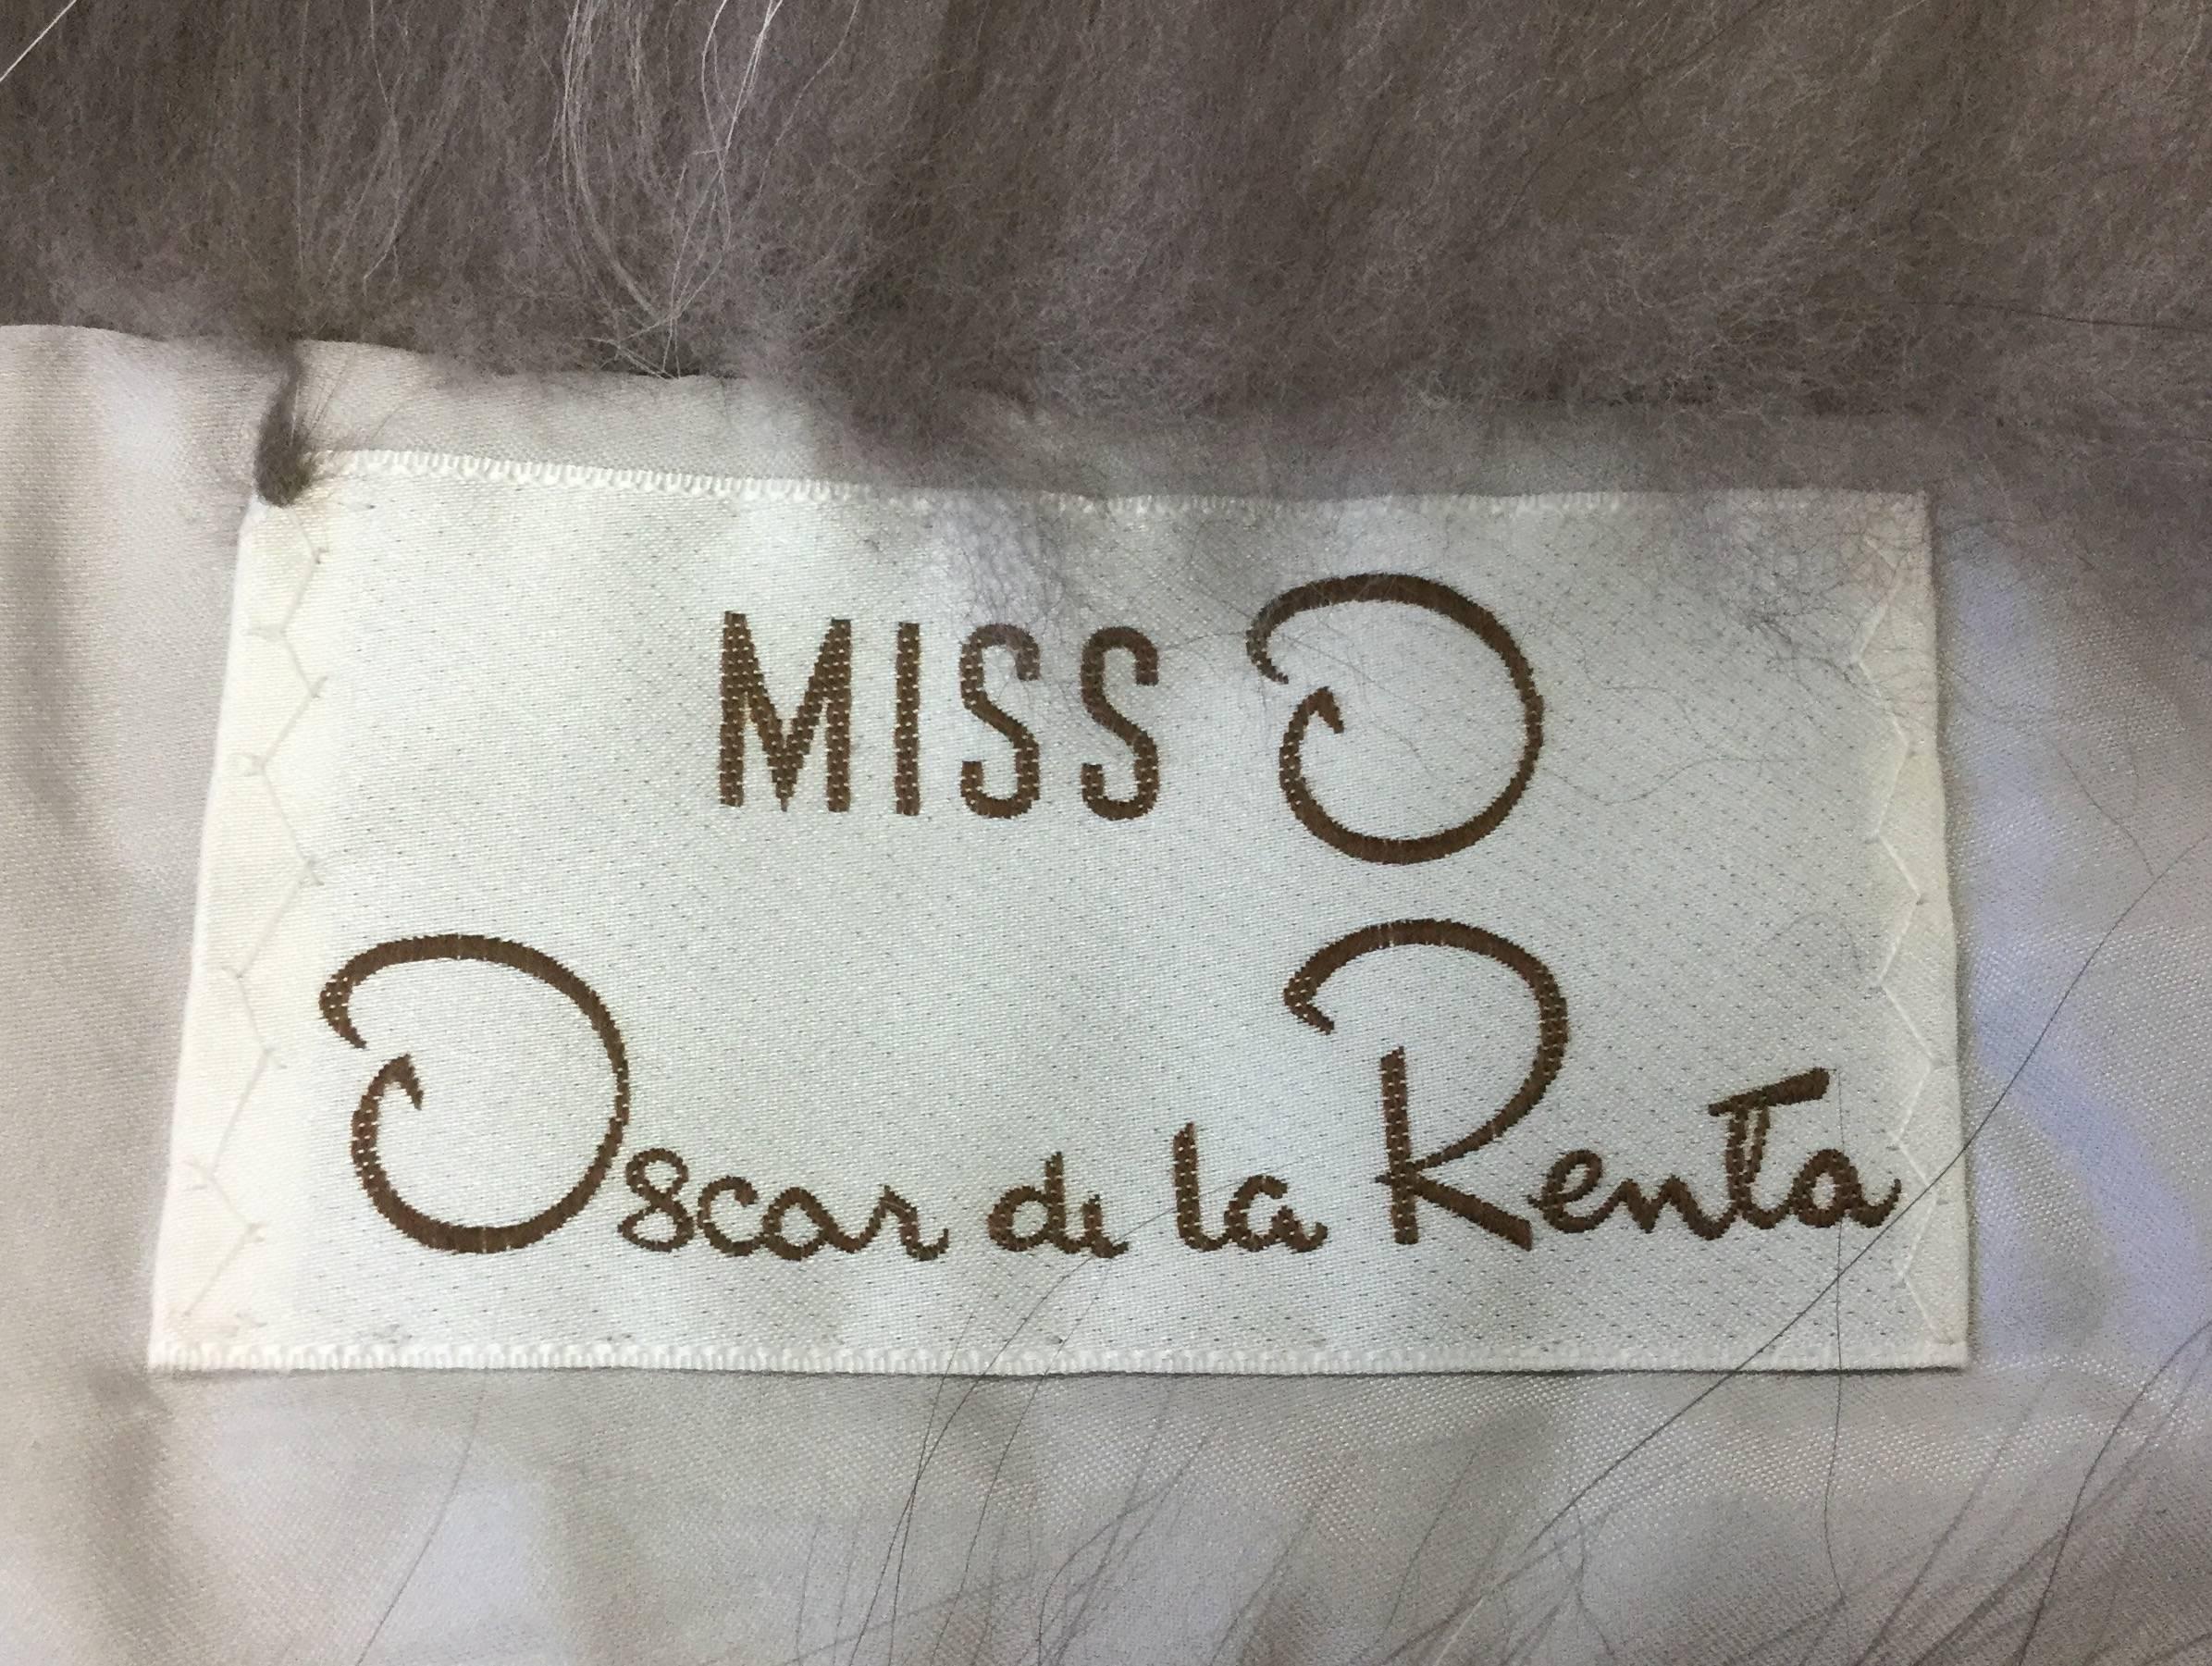 Exquisite  Miss "O", Oscar de la Renta Silver fox large fling. This large fling is made up of Silver fox with four tails at the ends. In excellent condition, this flingl consists of two pelts connected at one end with five smaller fur